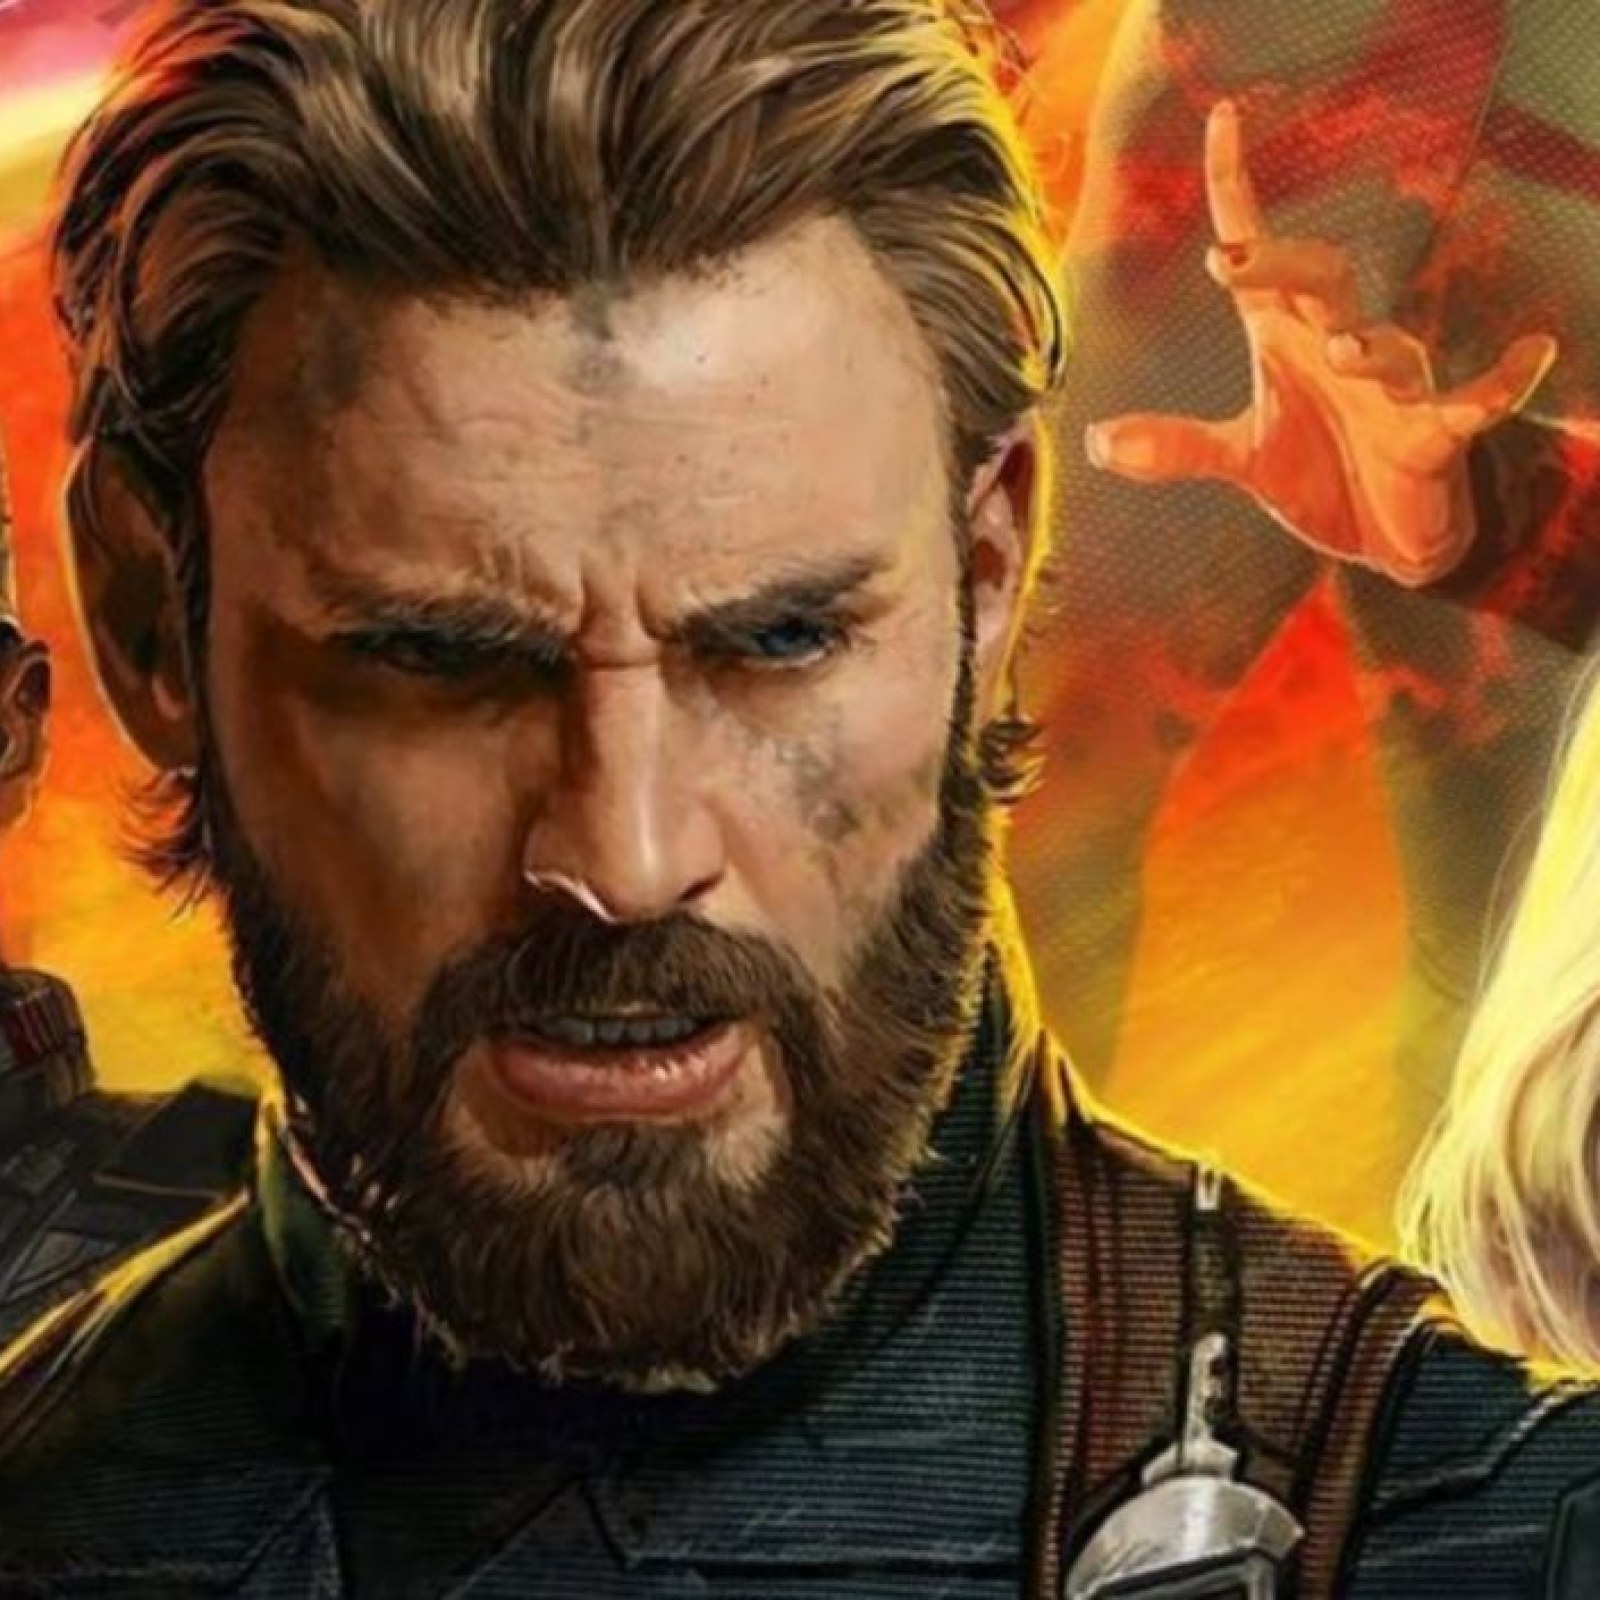 Fans Broke a Record Tweeting About Captain America's 'Infinity War' Beard